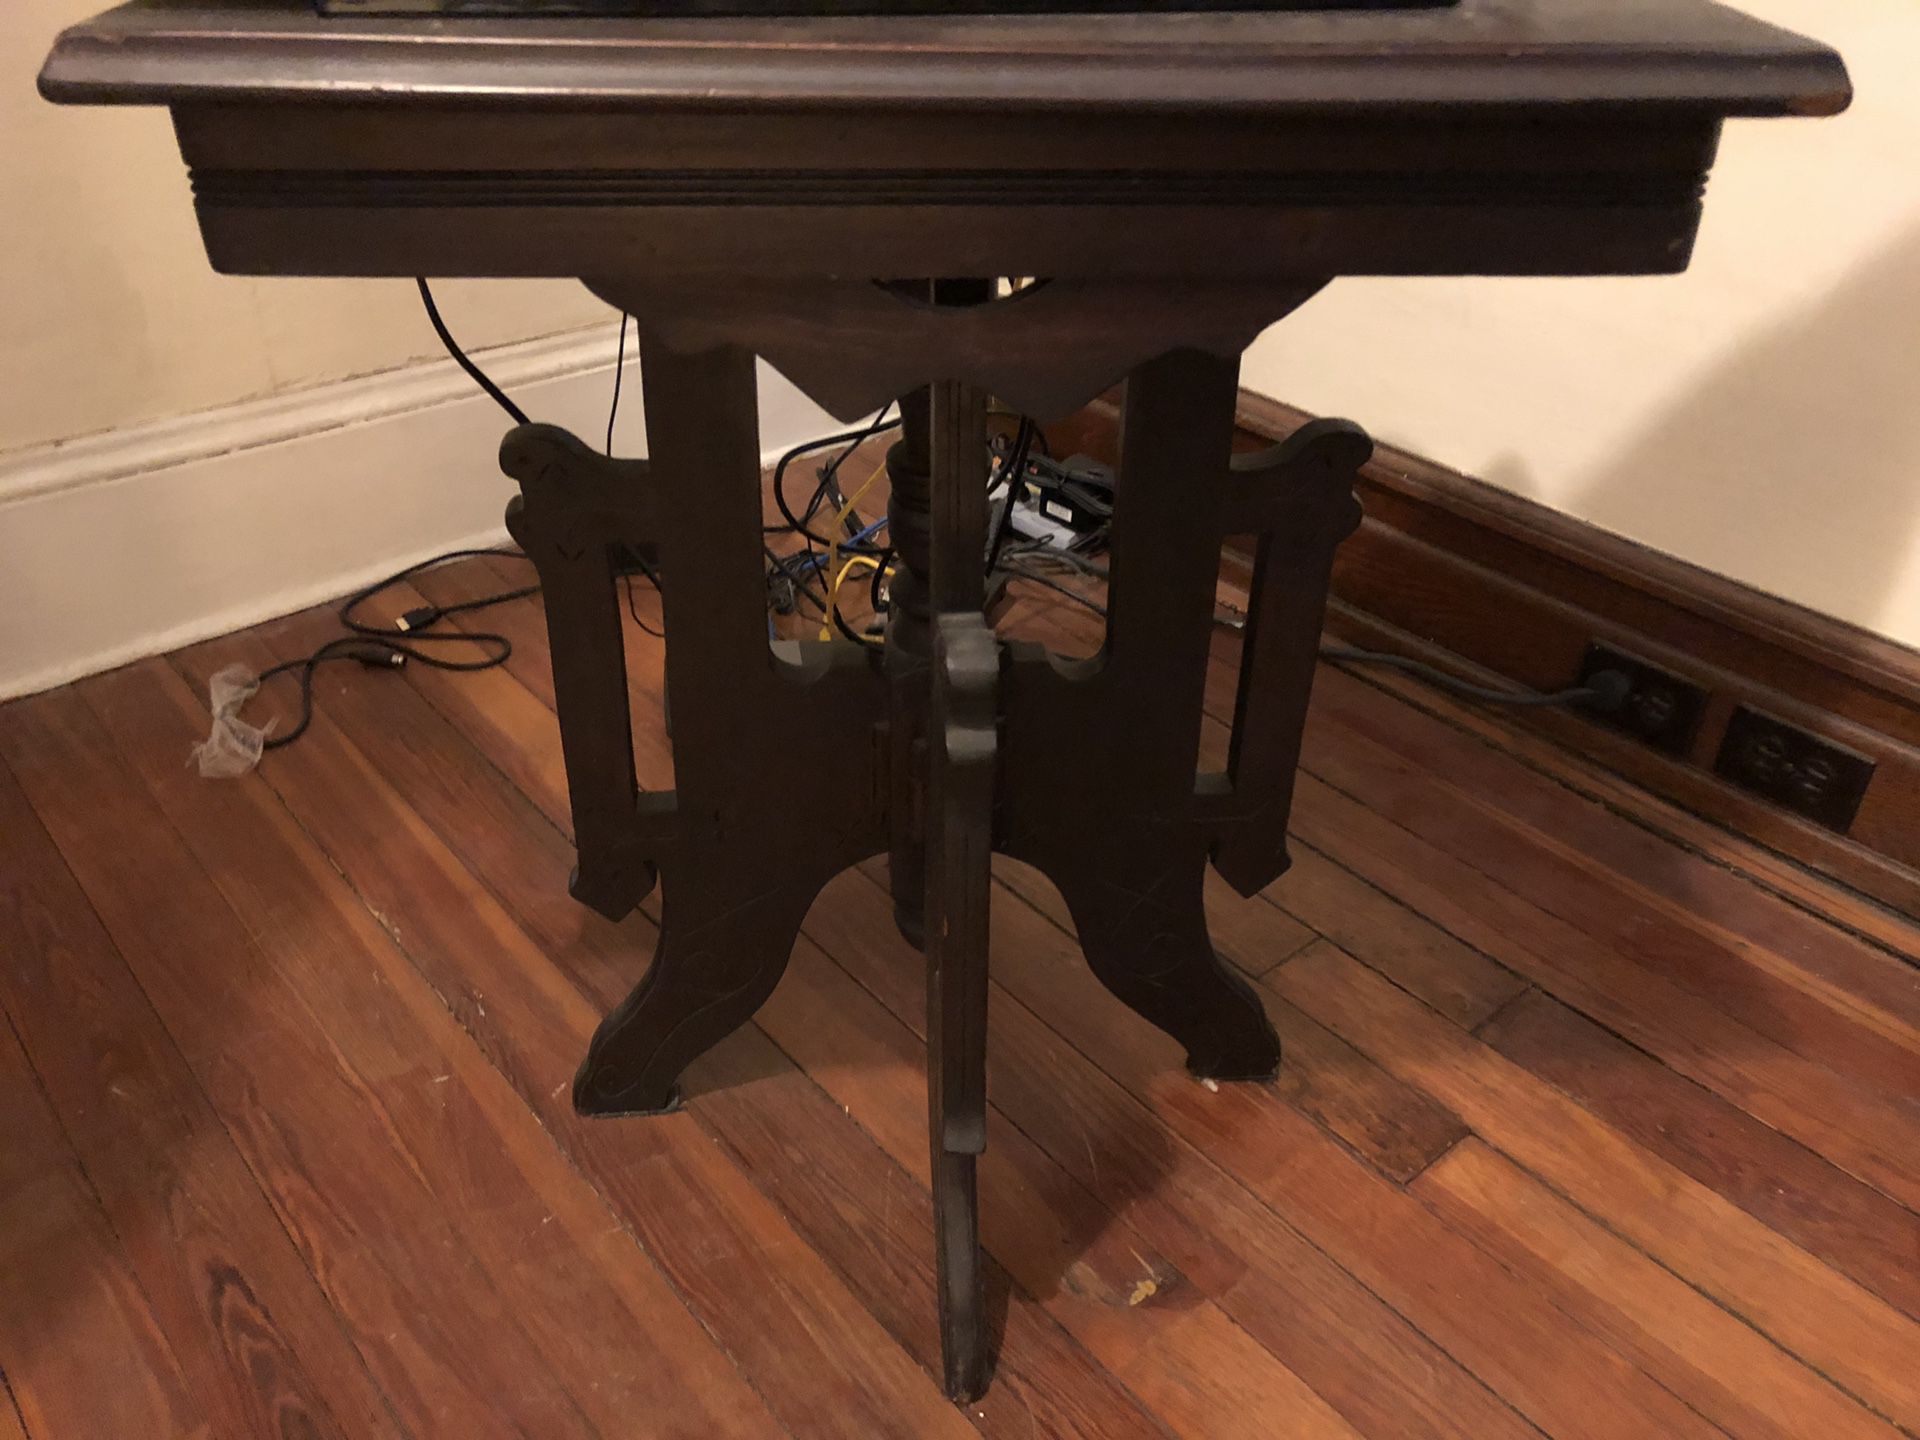 Antique Wood Table/Stand $30!!